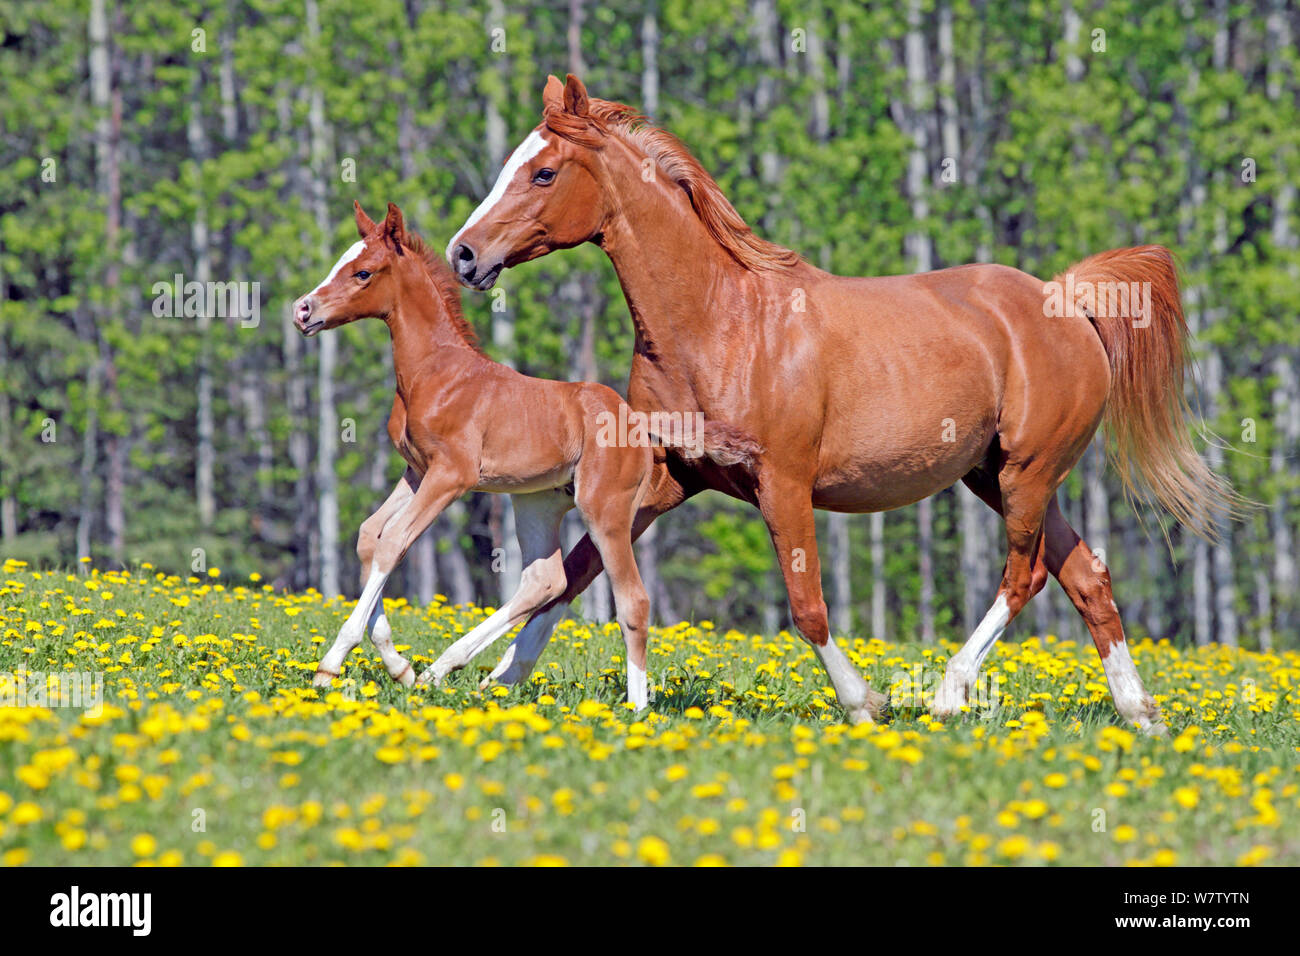 Beautiful chestnut Arabian Mare and few week old Foal running together on spring meadow full of yellow dandelion flowers. Stock Photo